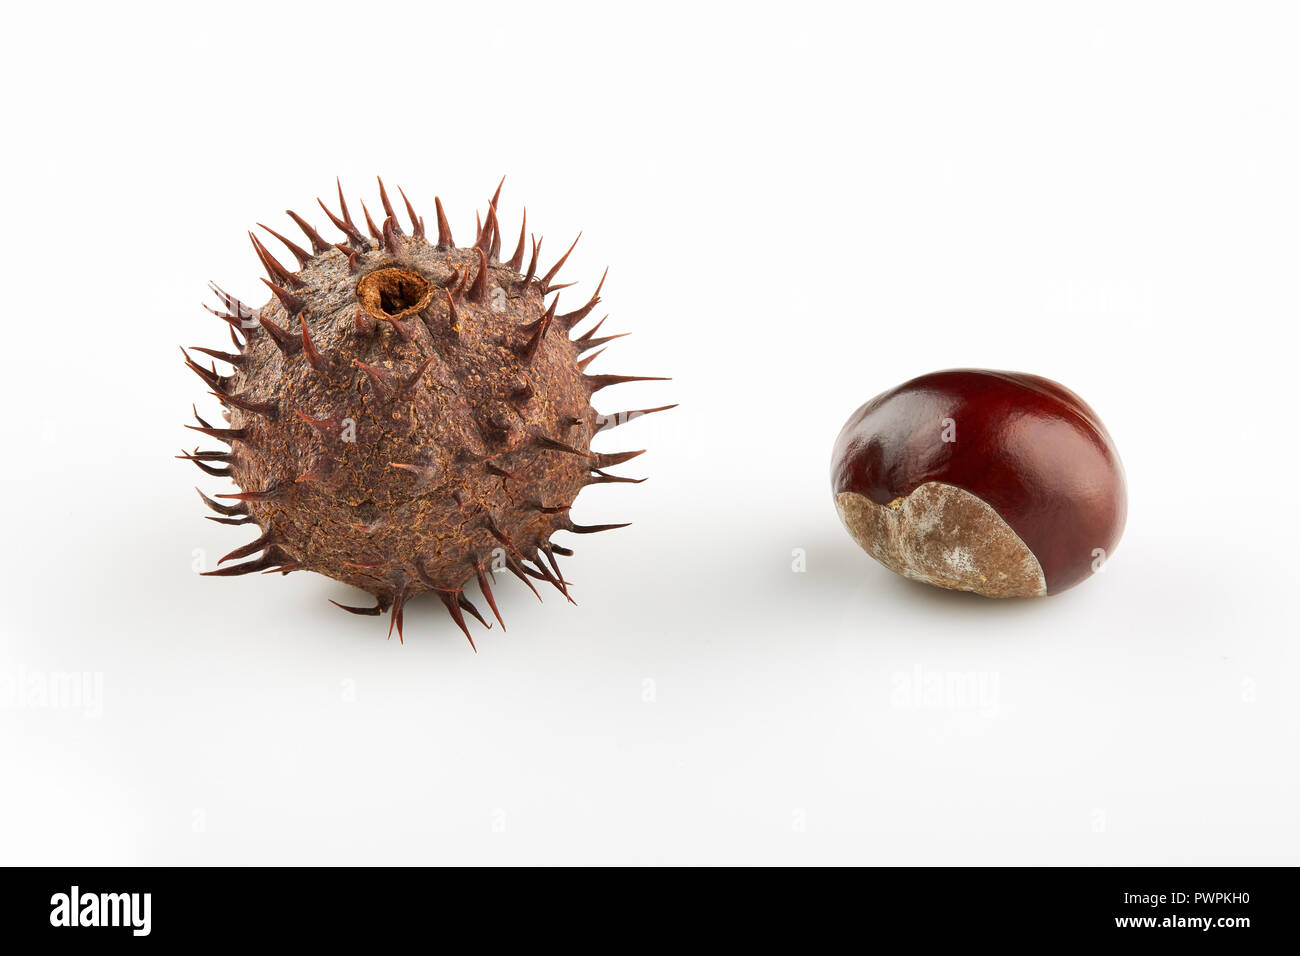 Two chestnuts with thorny peel on white background. Stock Photo